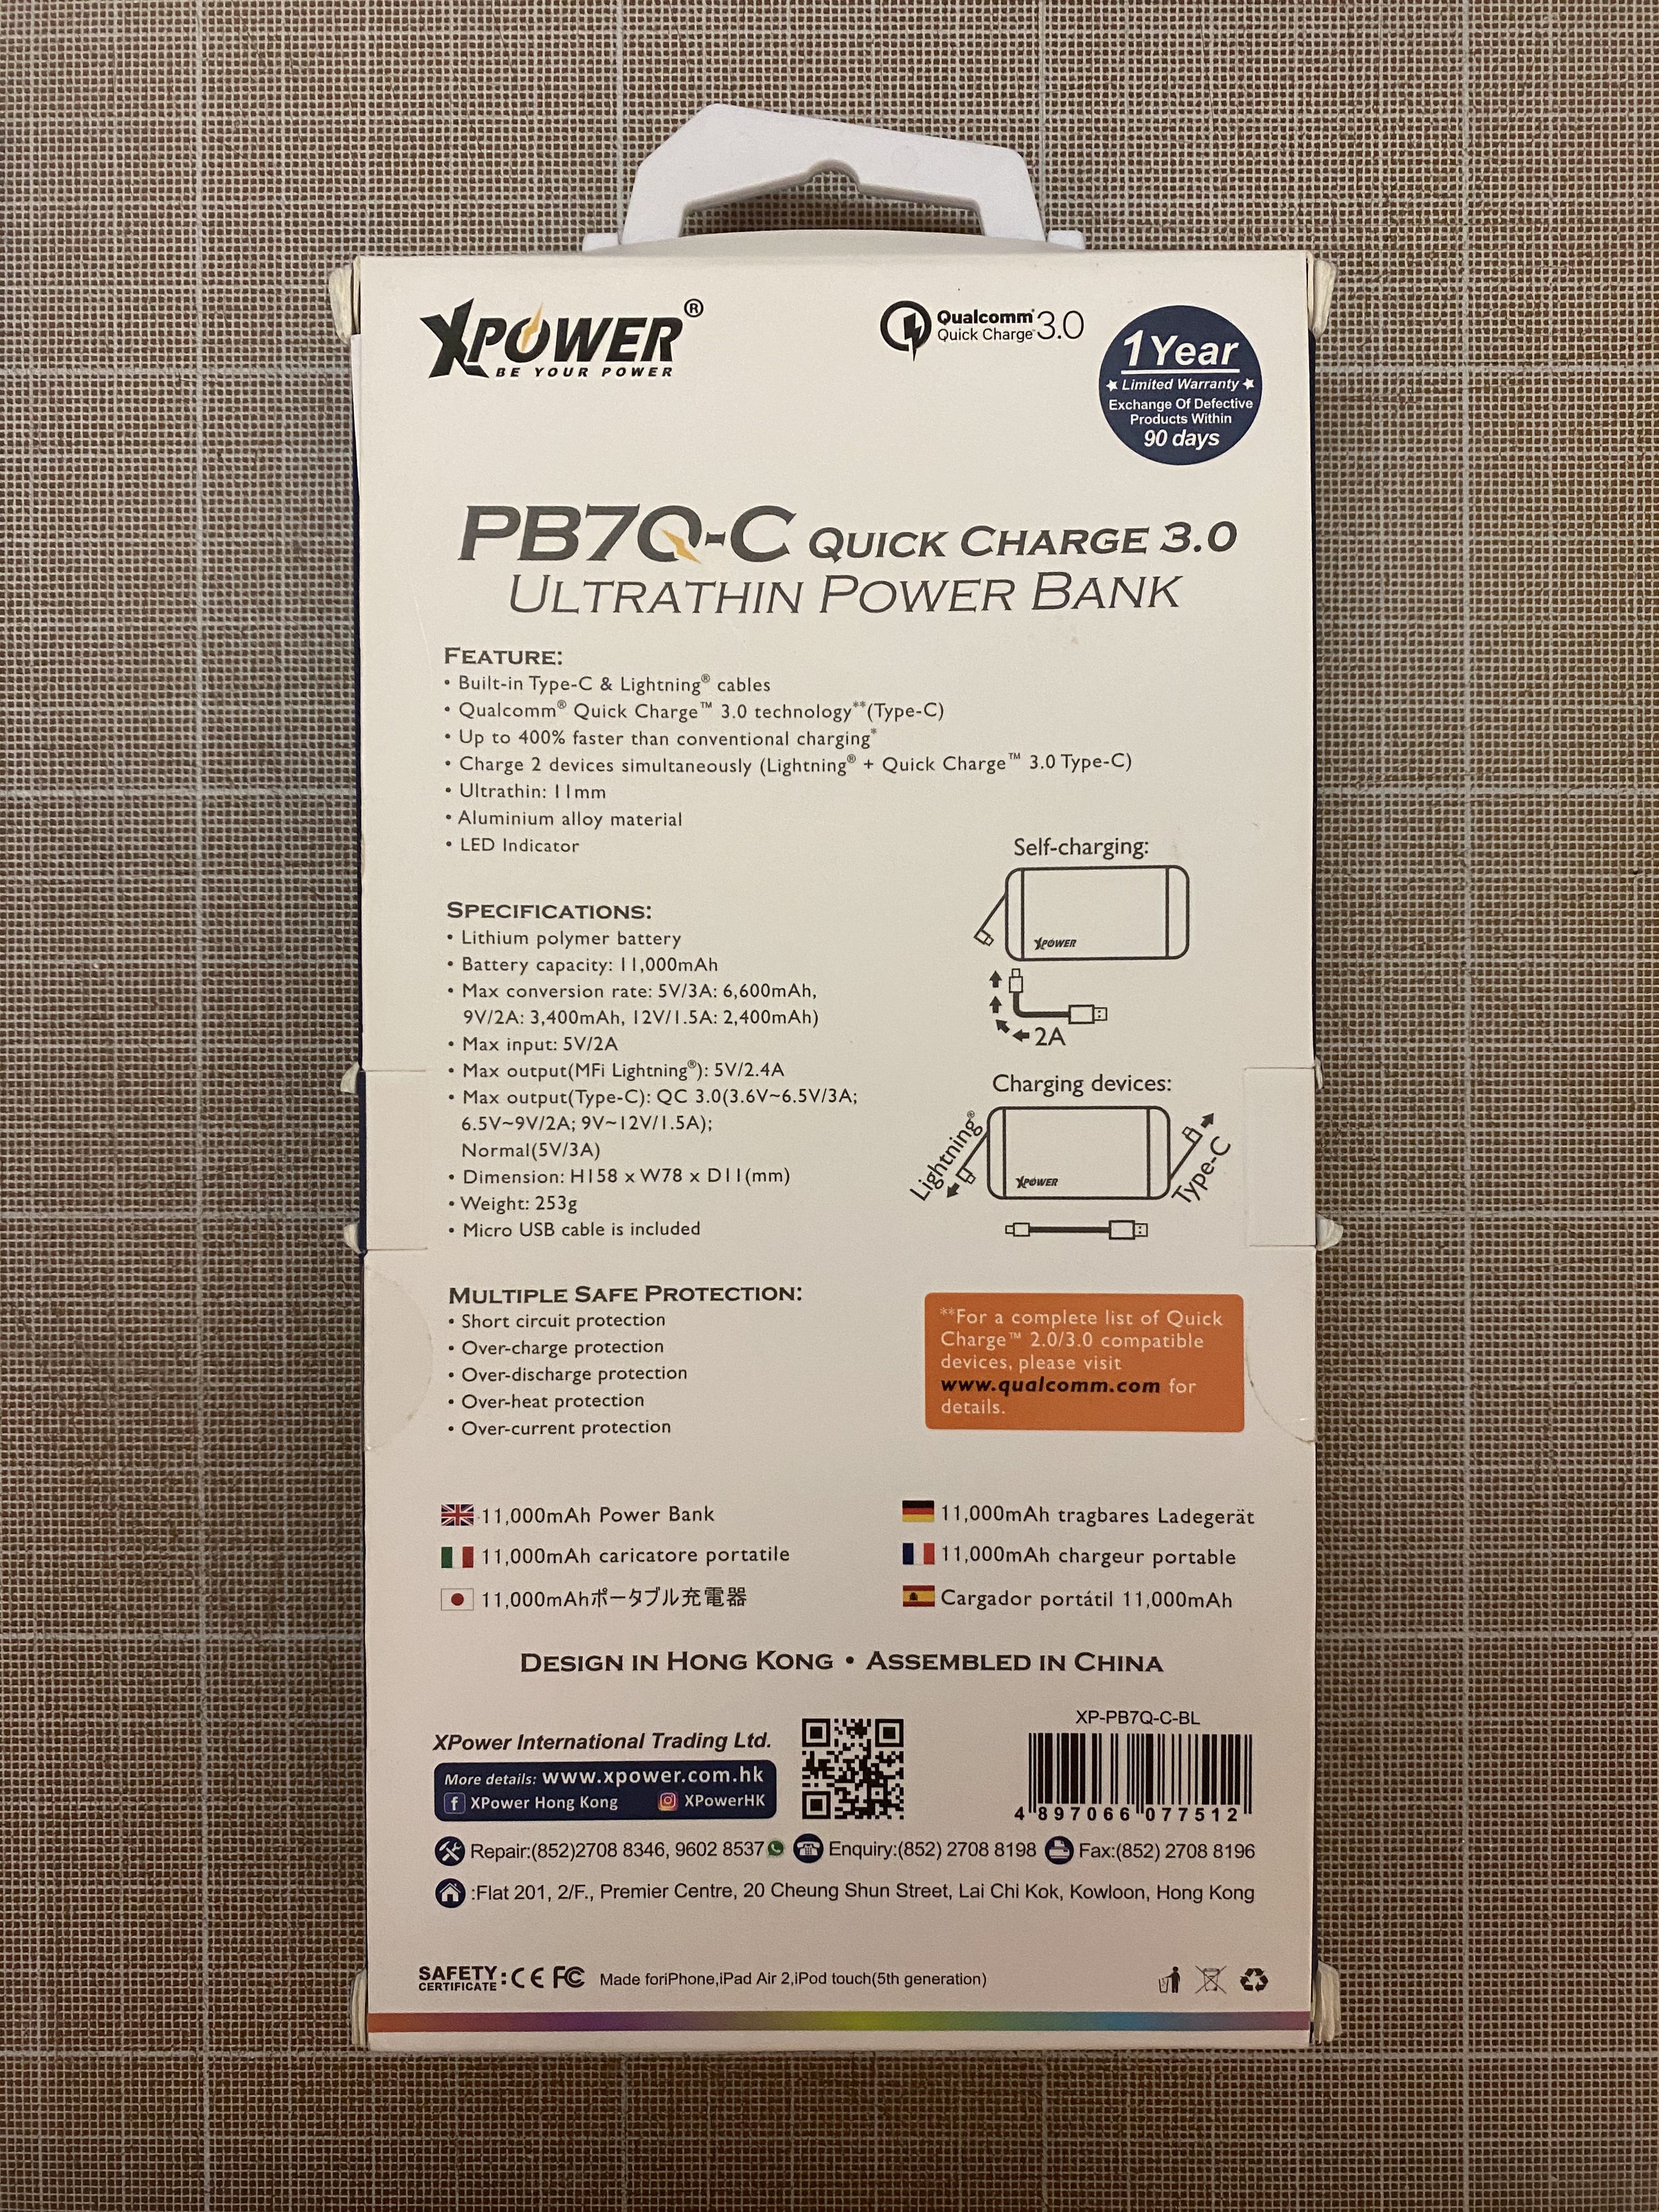 xPower PB7Q-C Quick Charge 3.0 Power Bank